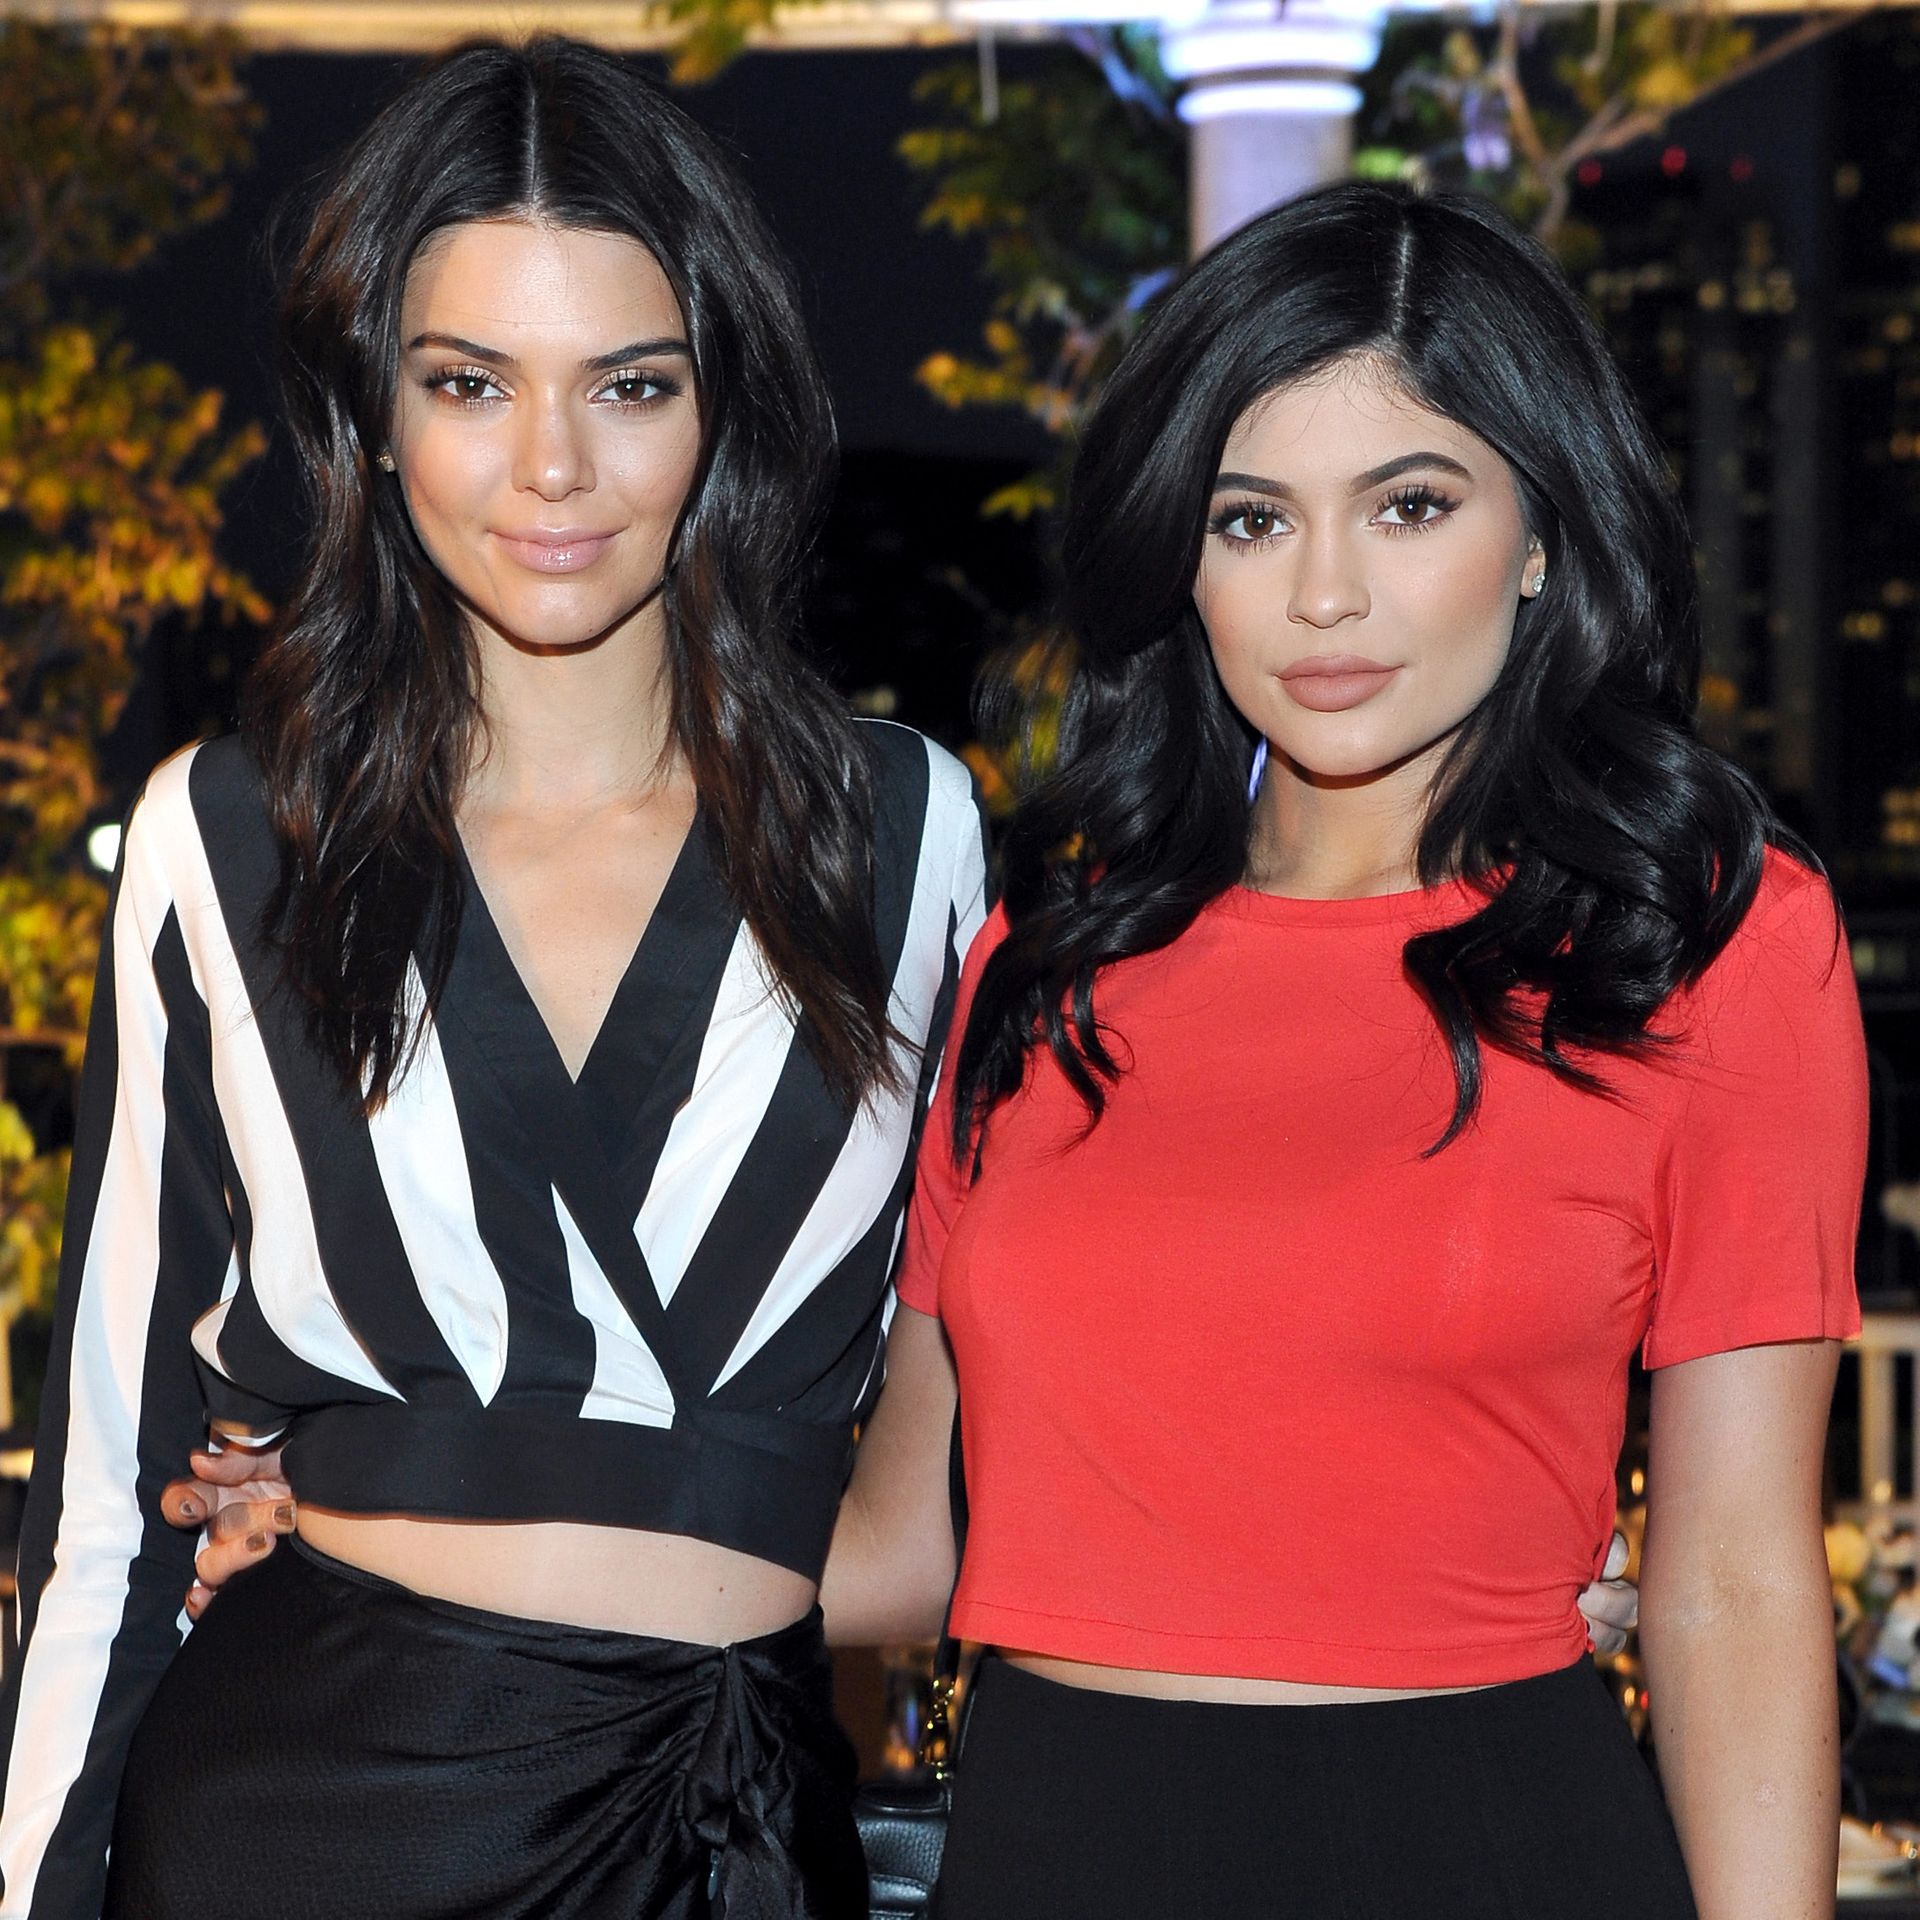 Kylie Jenner Shares Throwback Picture of Sister Kendall Jenner; Check